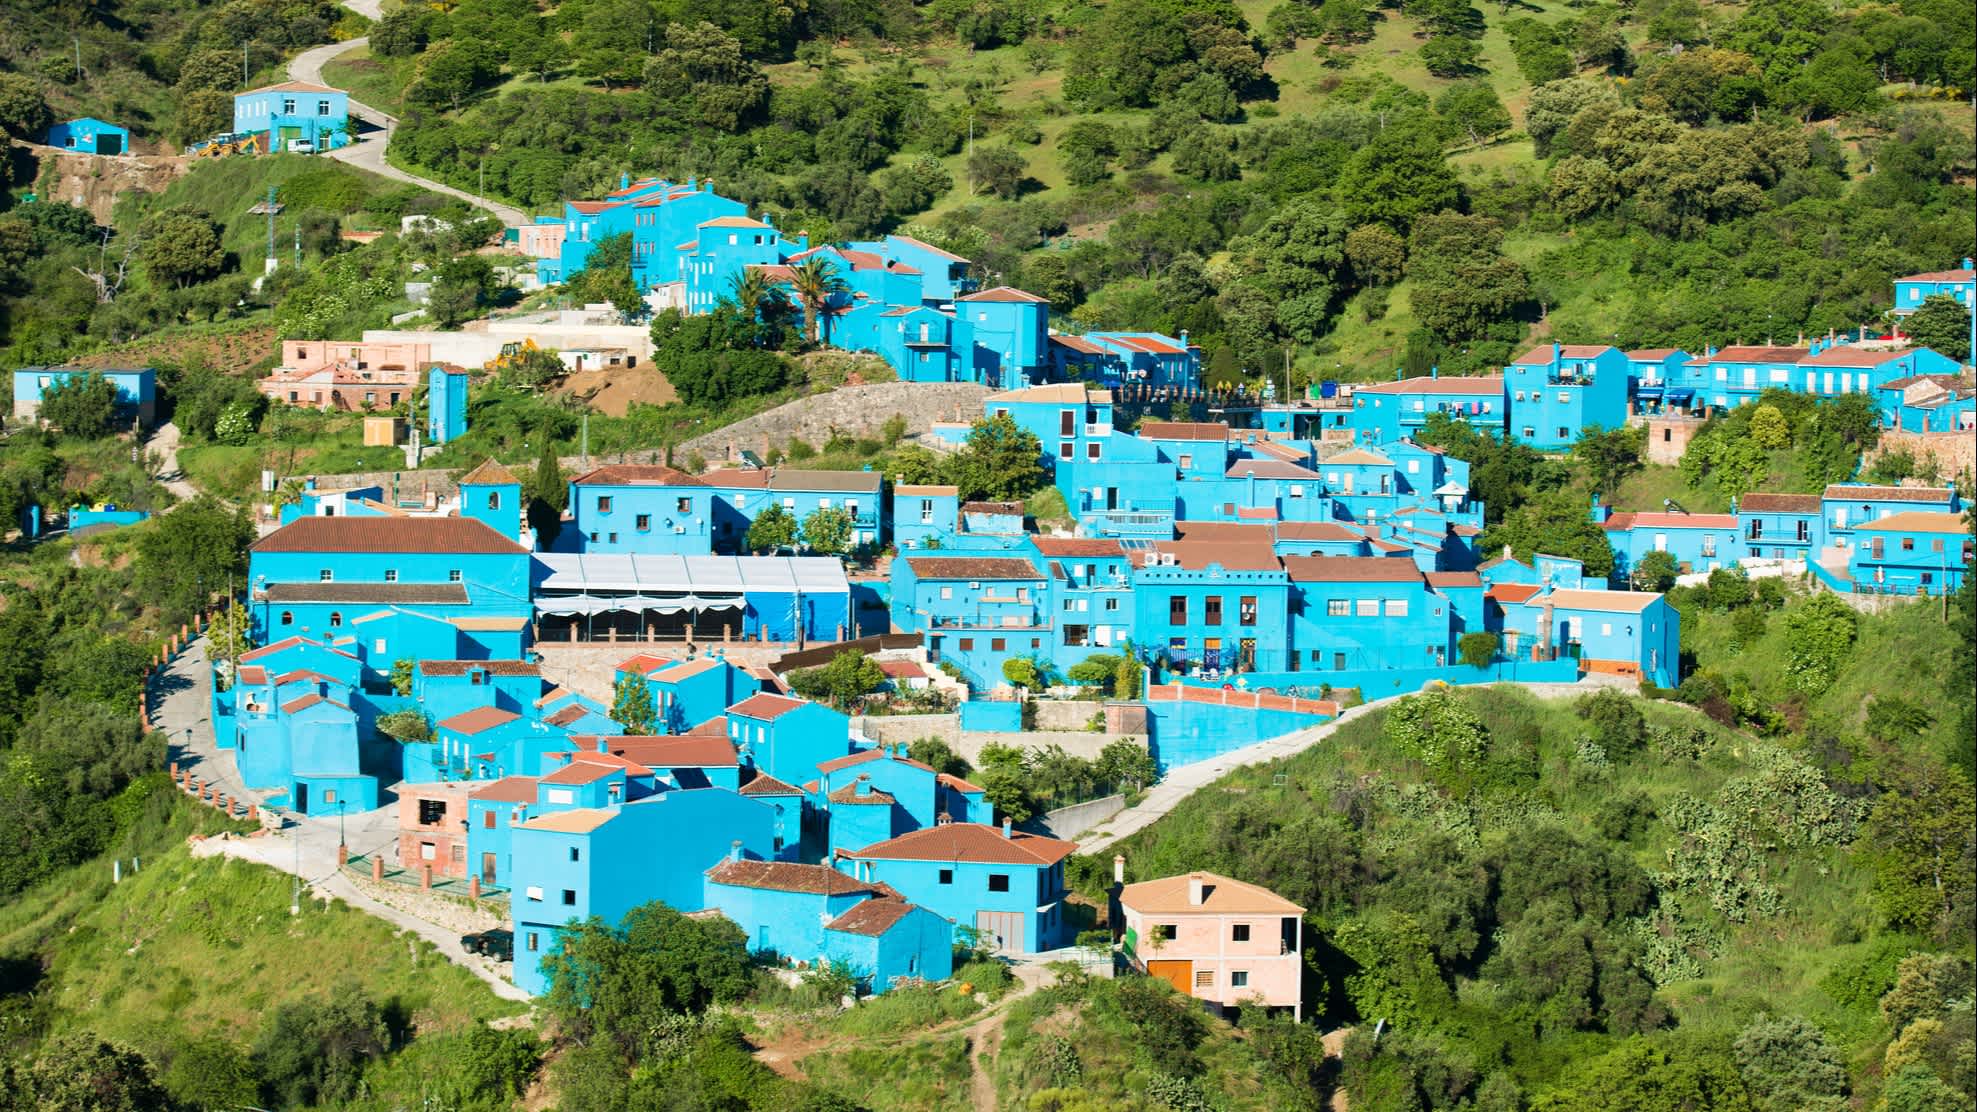 Discover the beautiful blue town of Juzcar, pictured here from above, on a tour of Spain